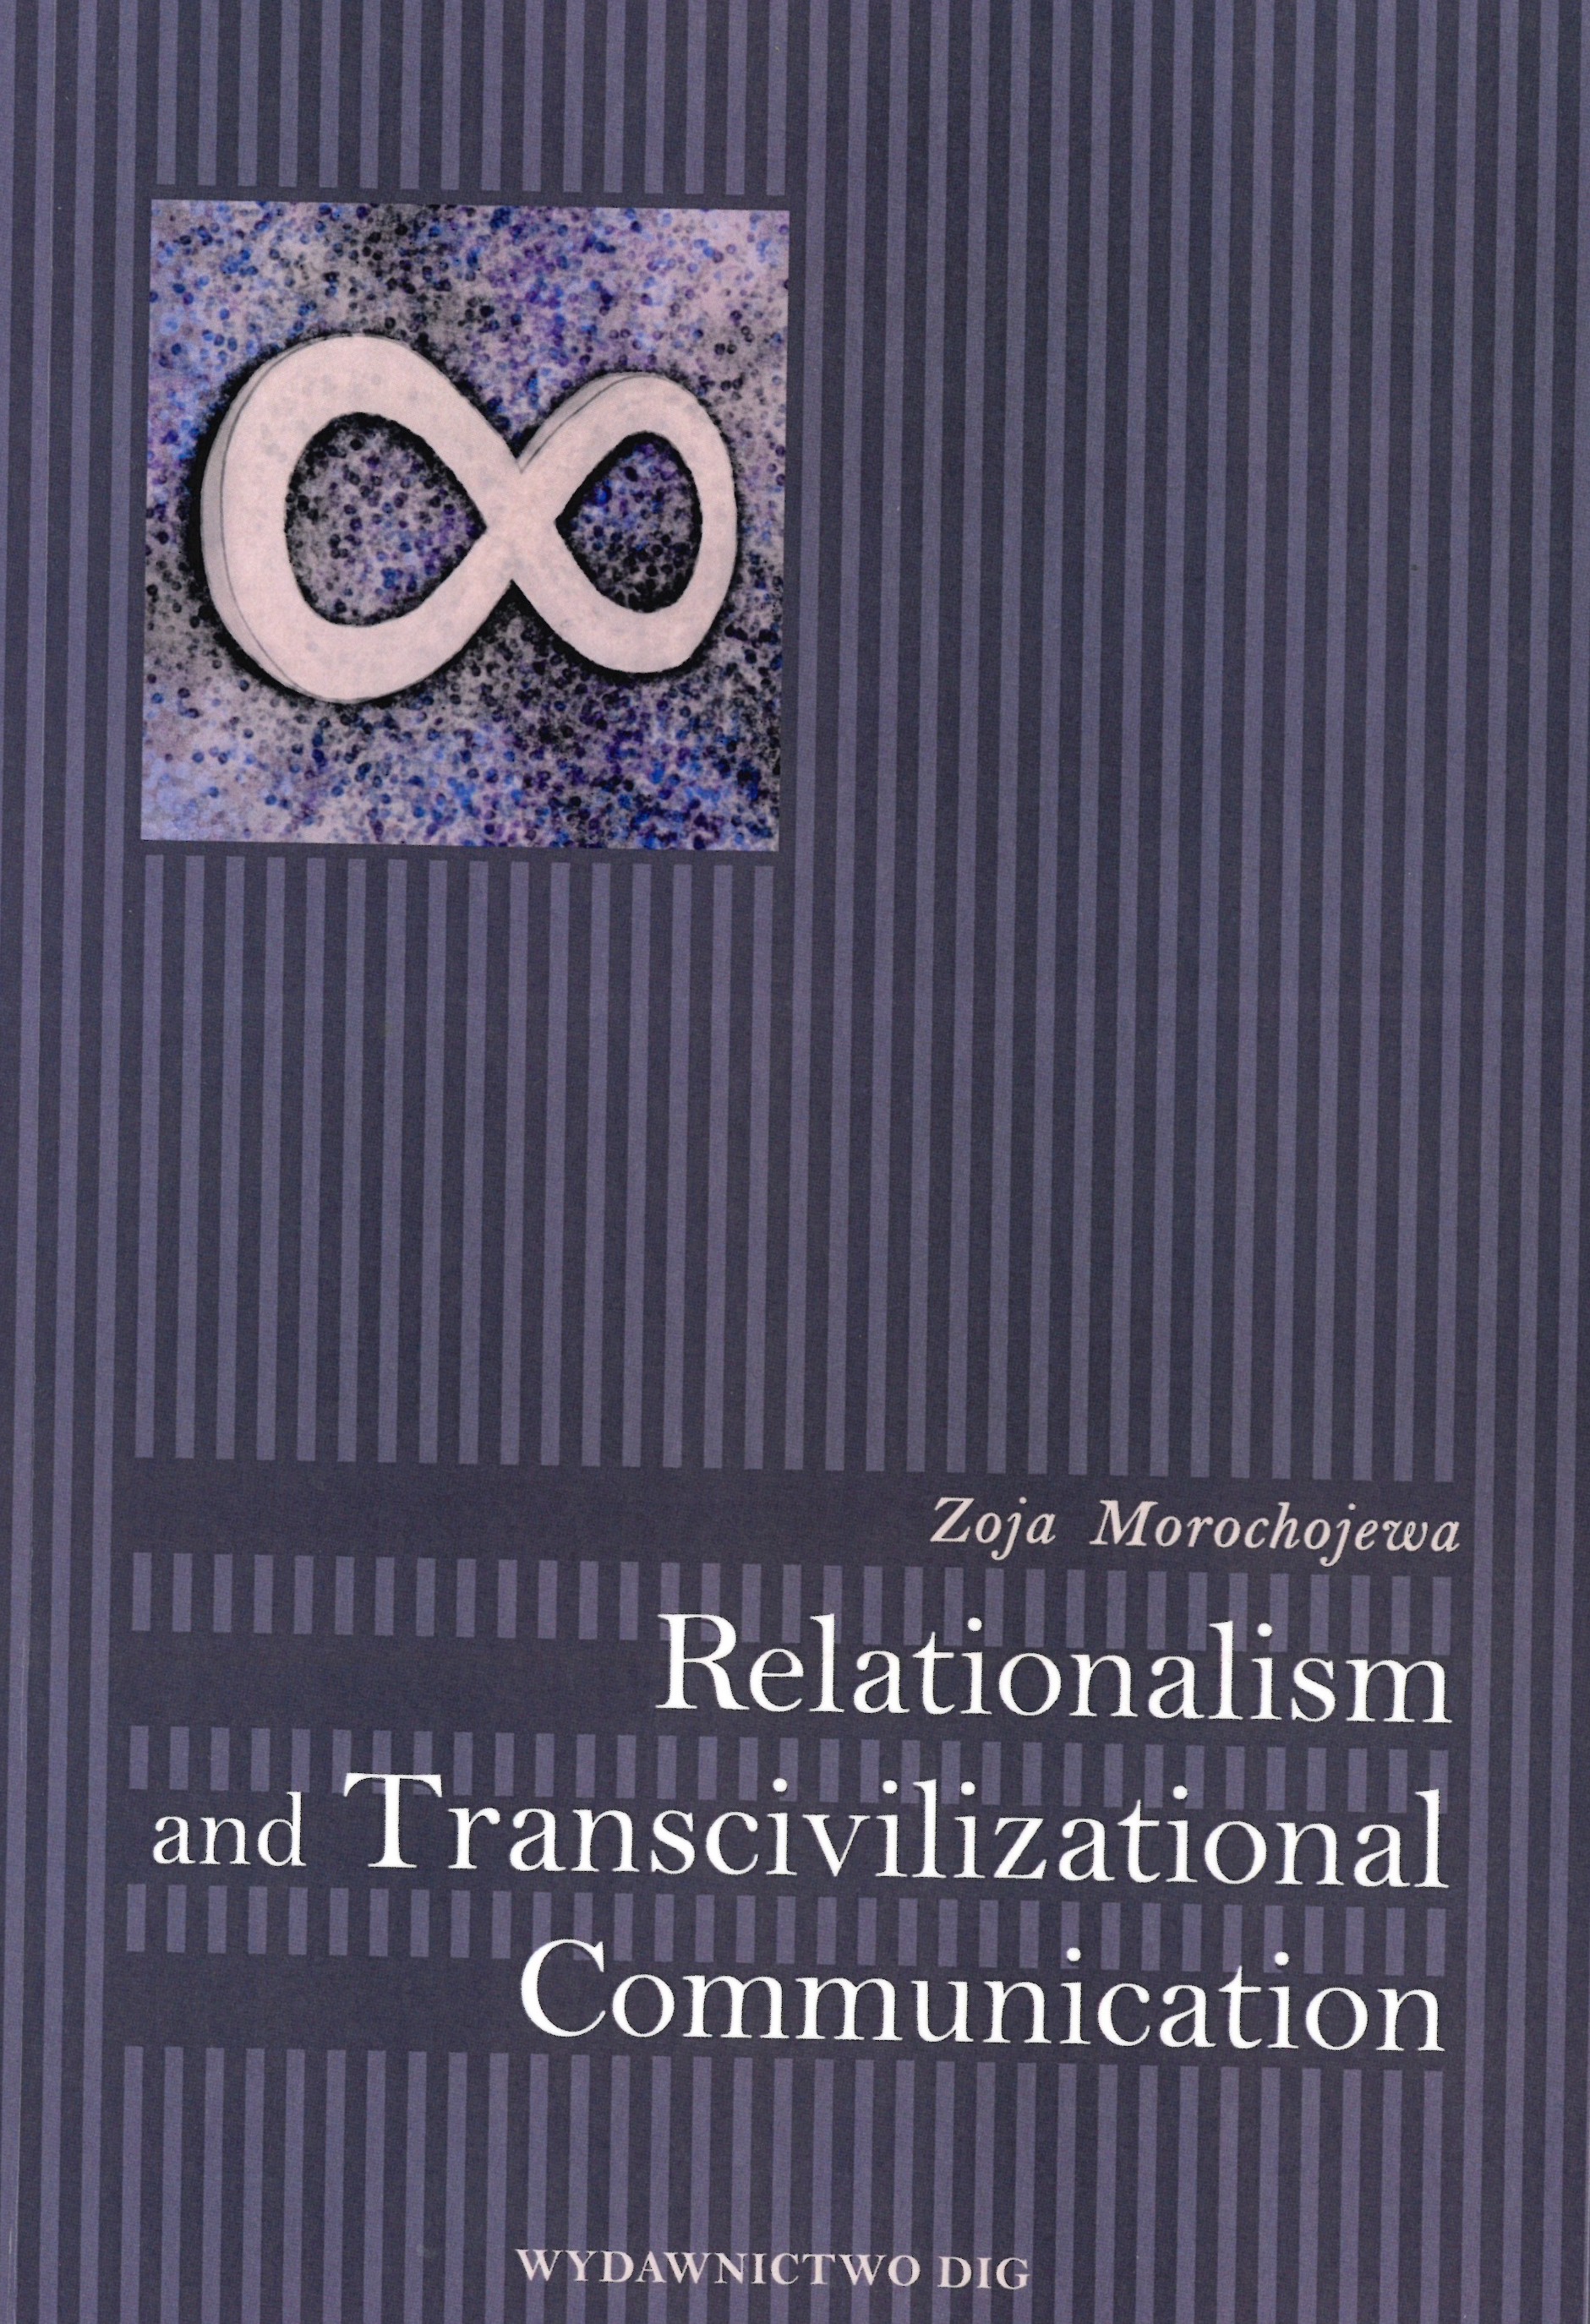 Book Cover: Relationalism and Transcivilizational Communication